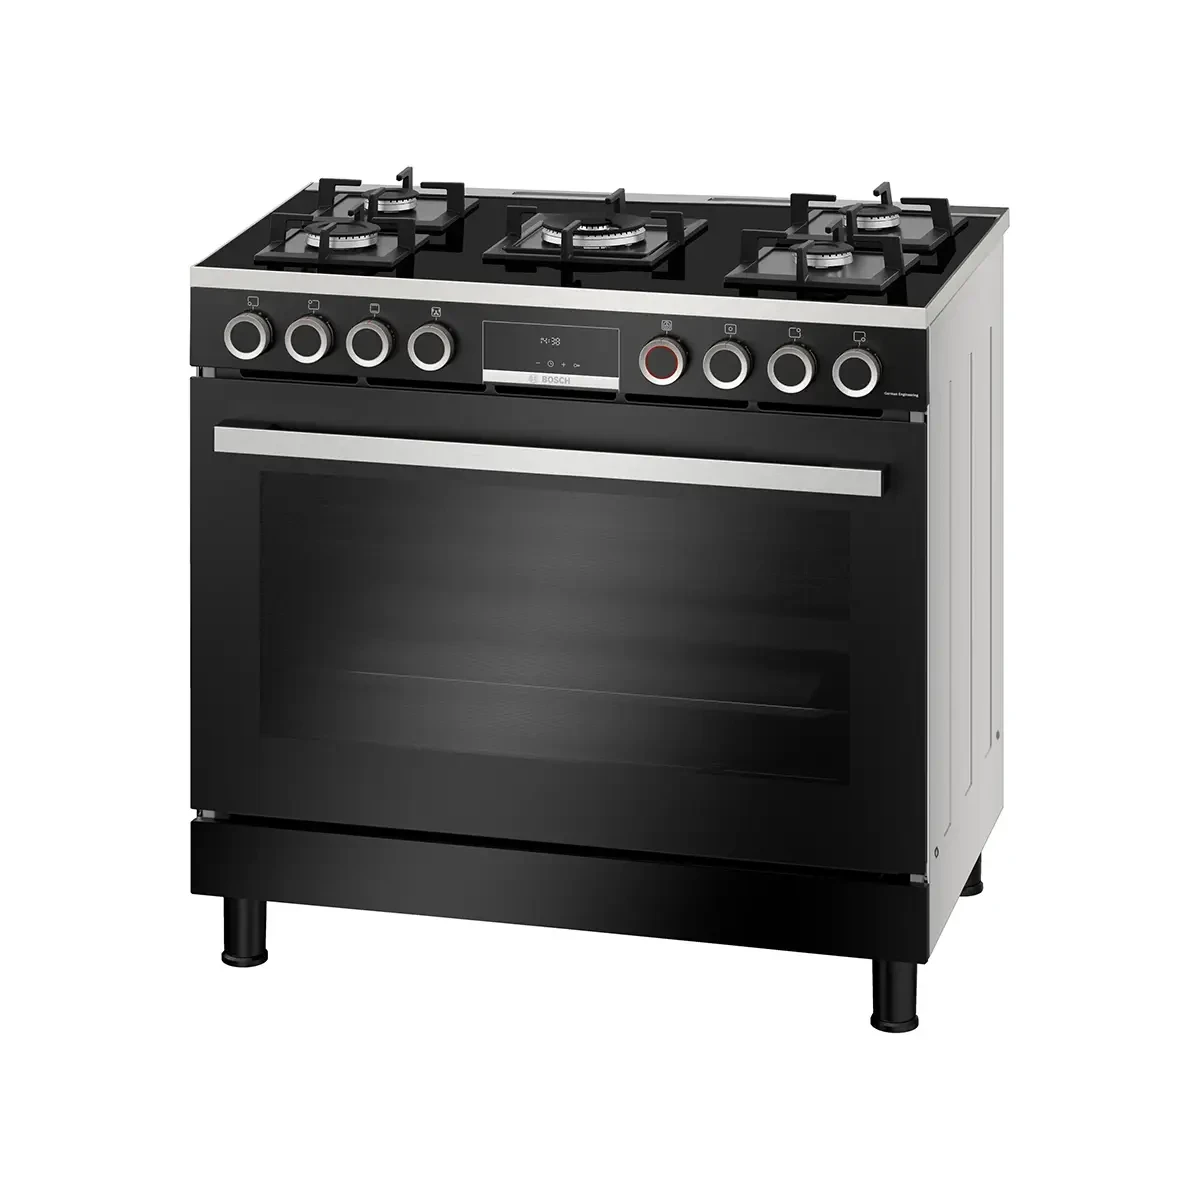 BOSCH COOKER 90 * 60 CM 5 BURNERS STAINLESS STEEL